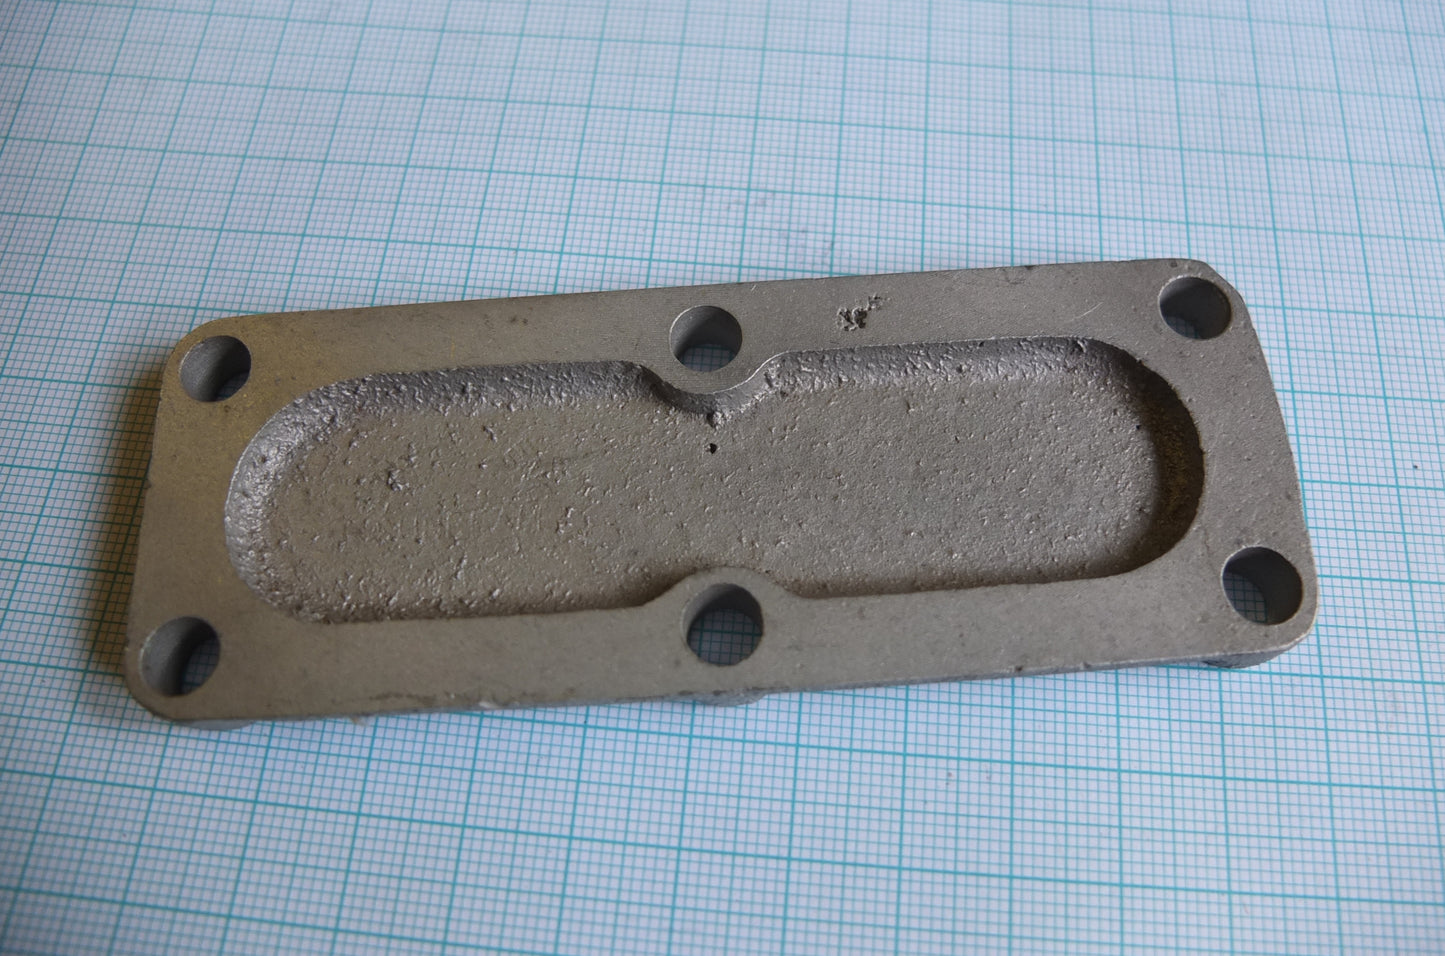 P1/141 Chain inspection plate